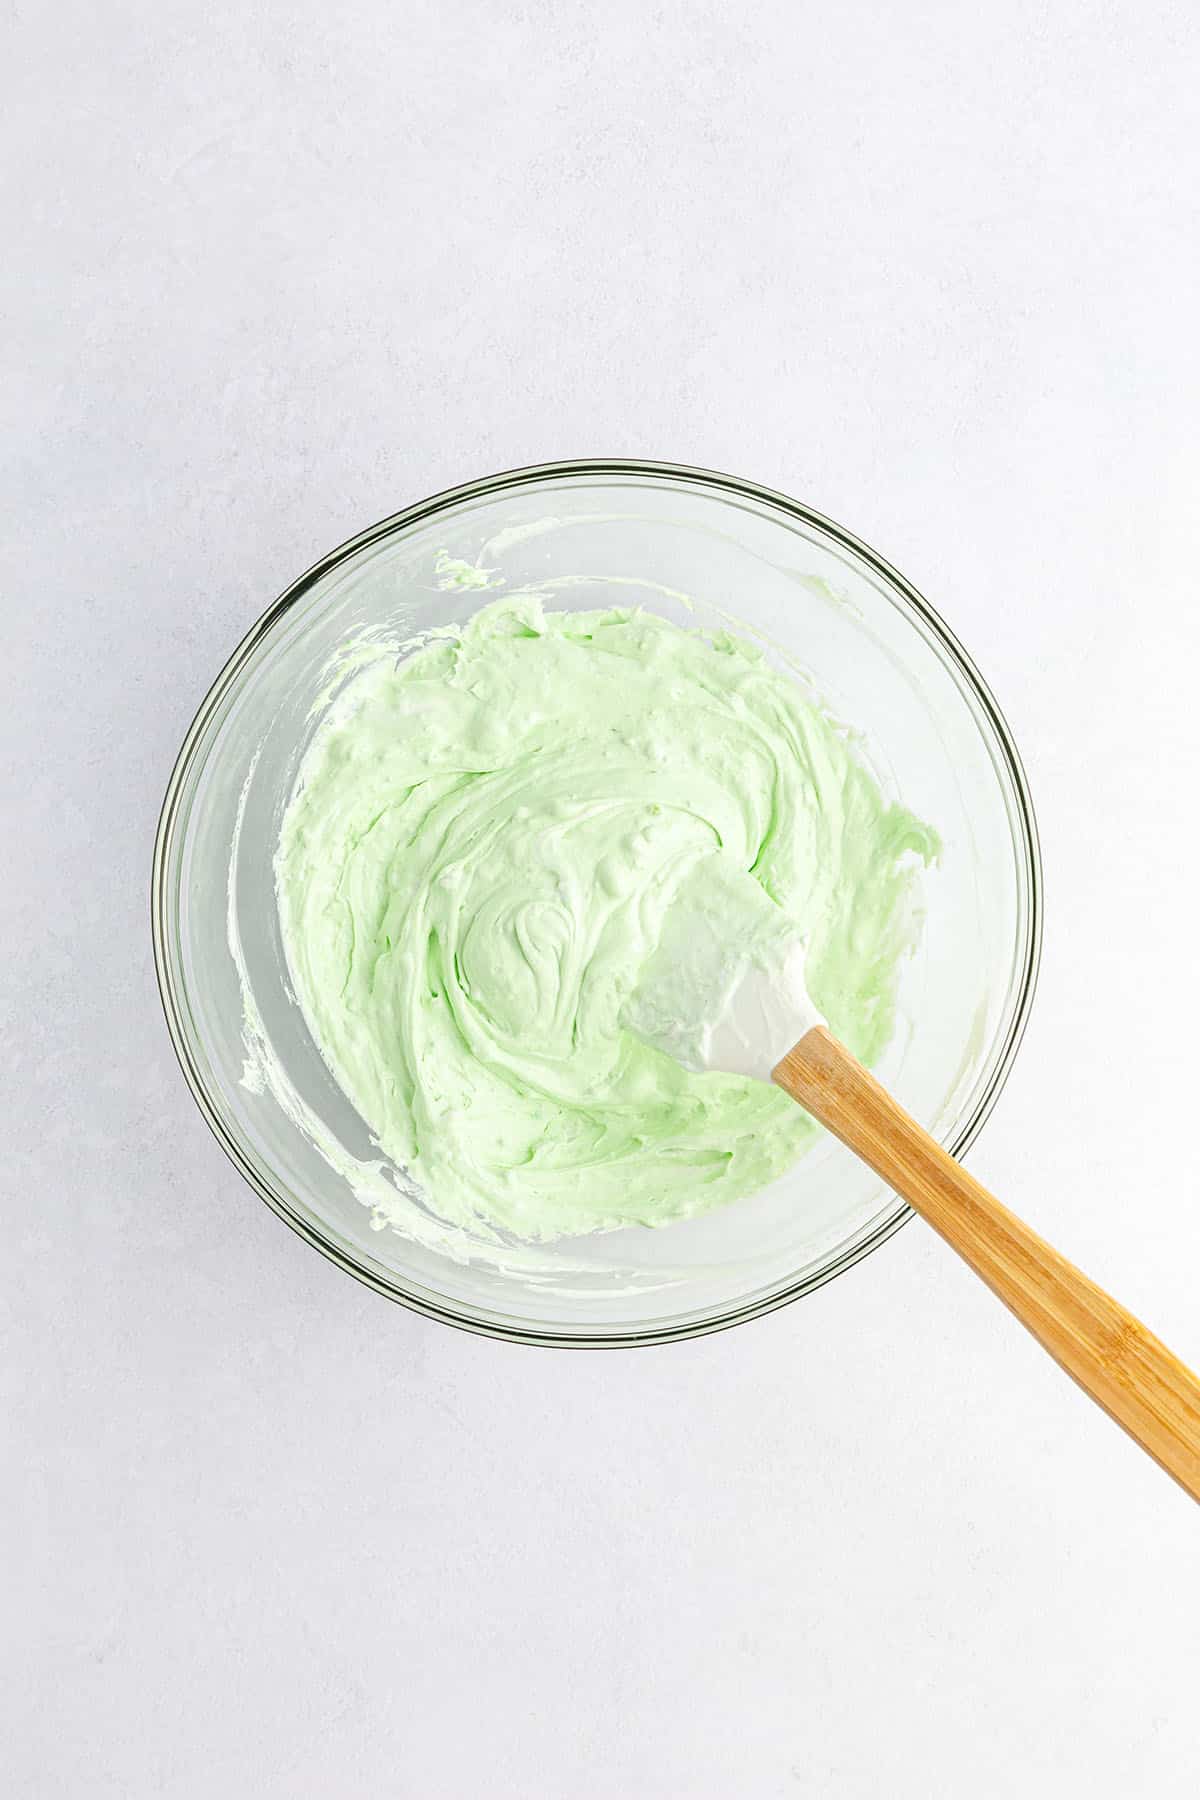 A creamy consistency pudding mixture in light green color with spatula